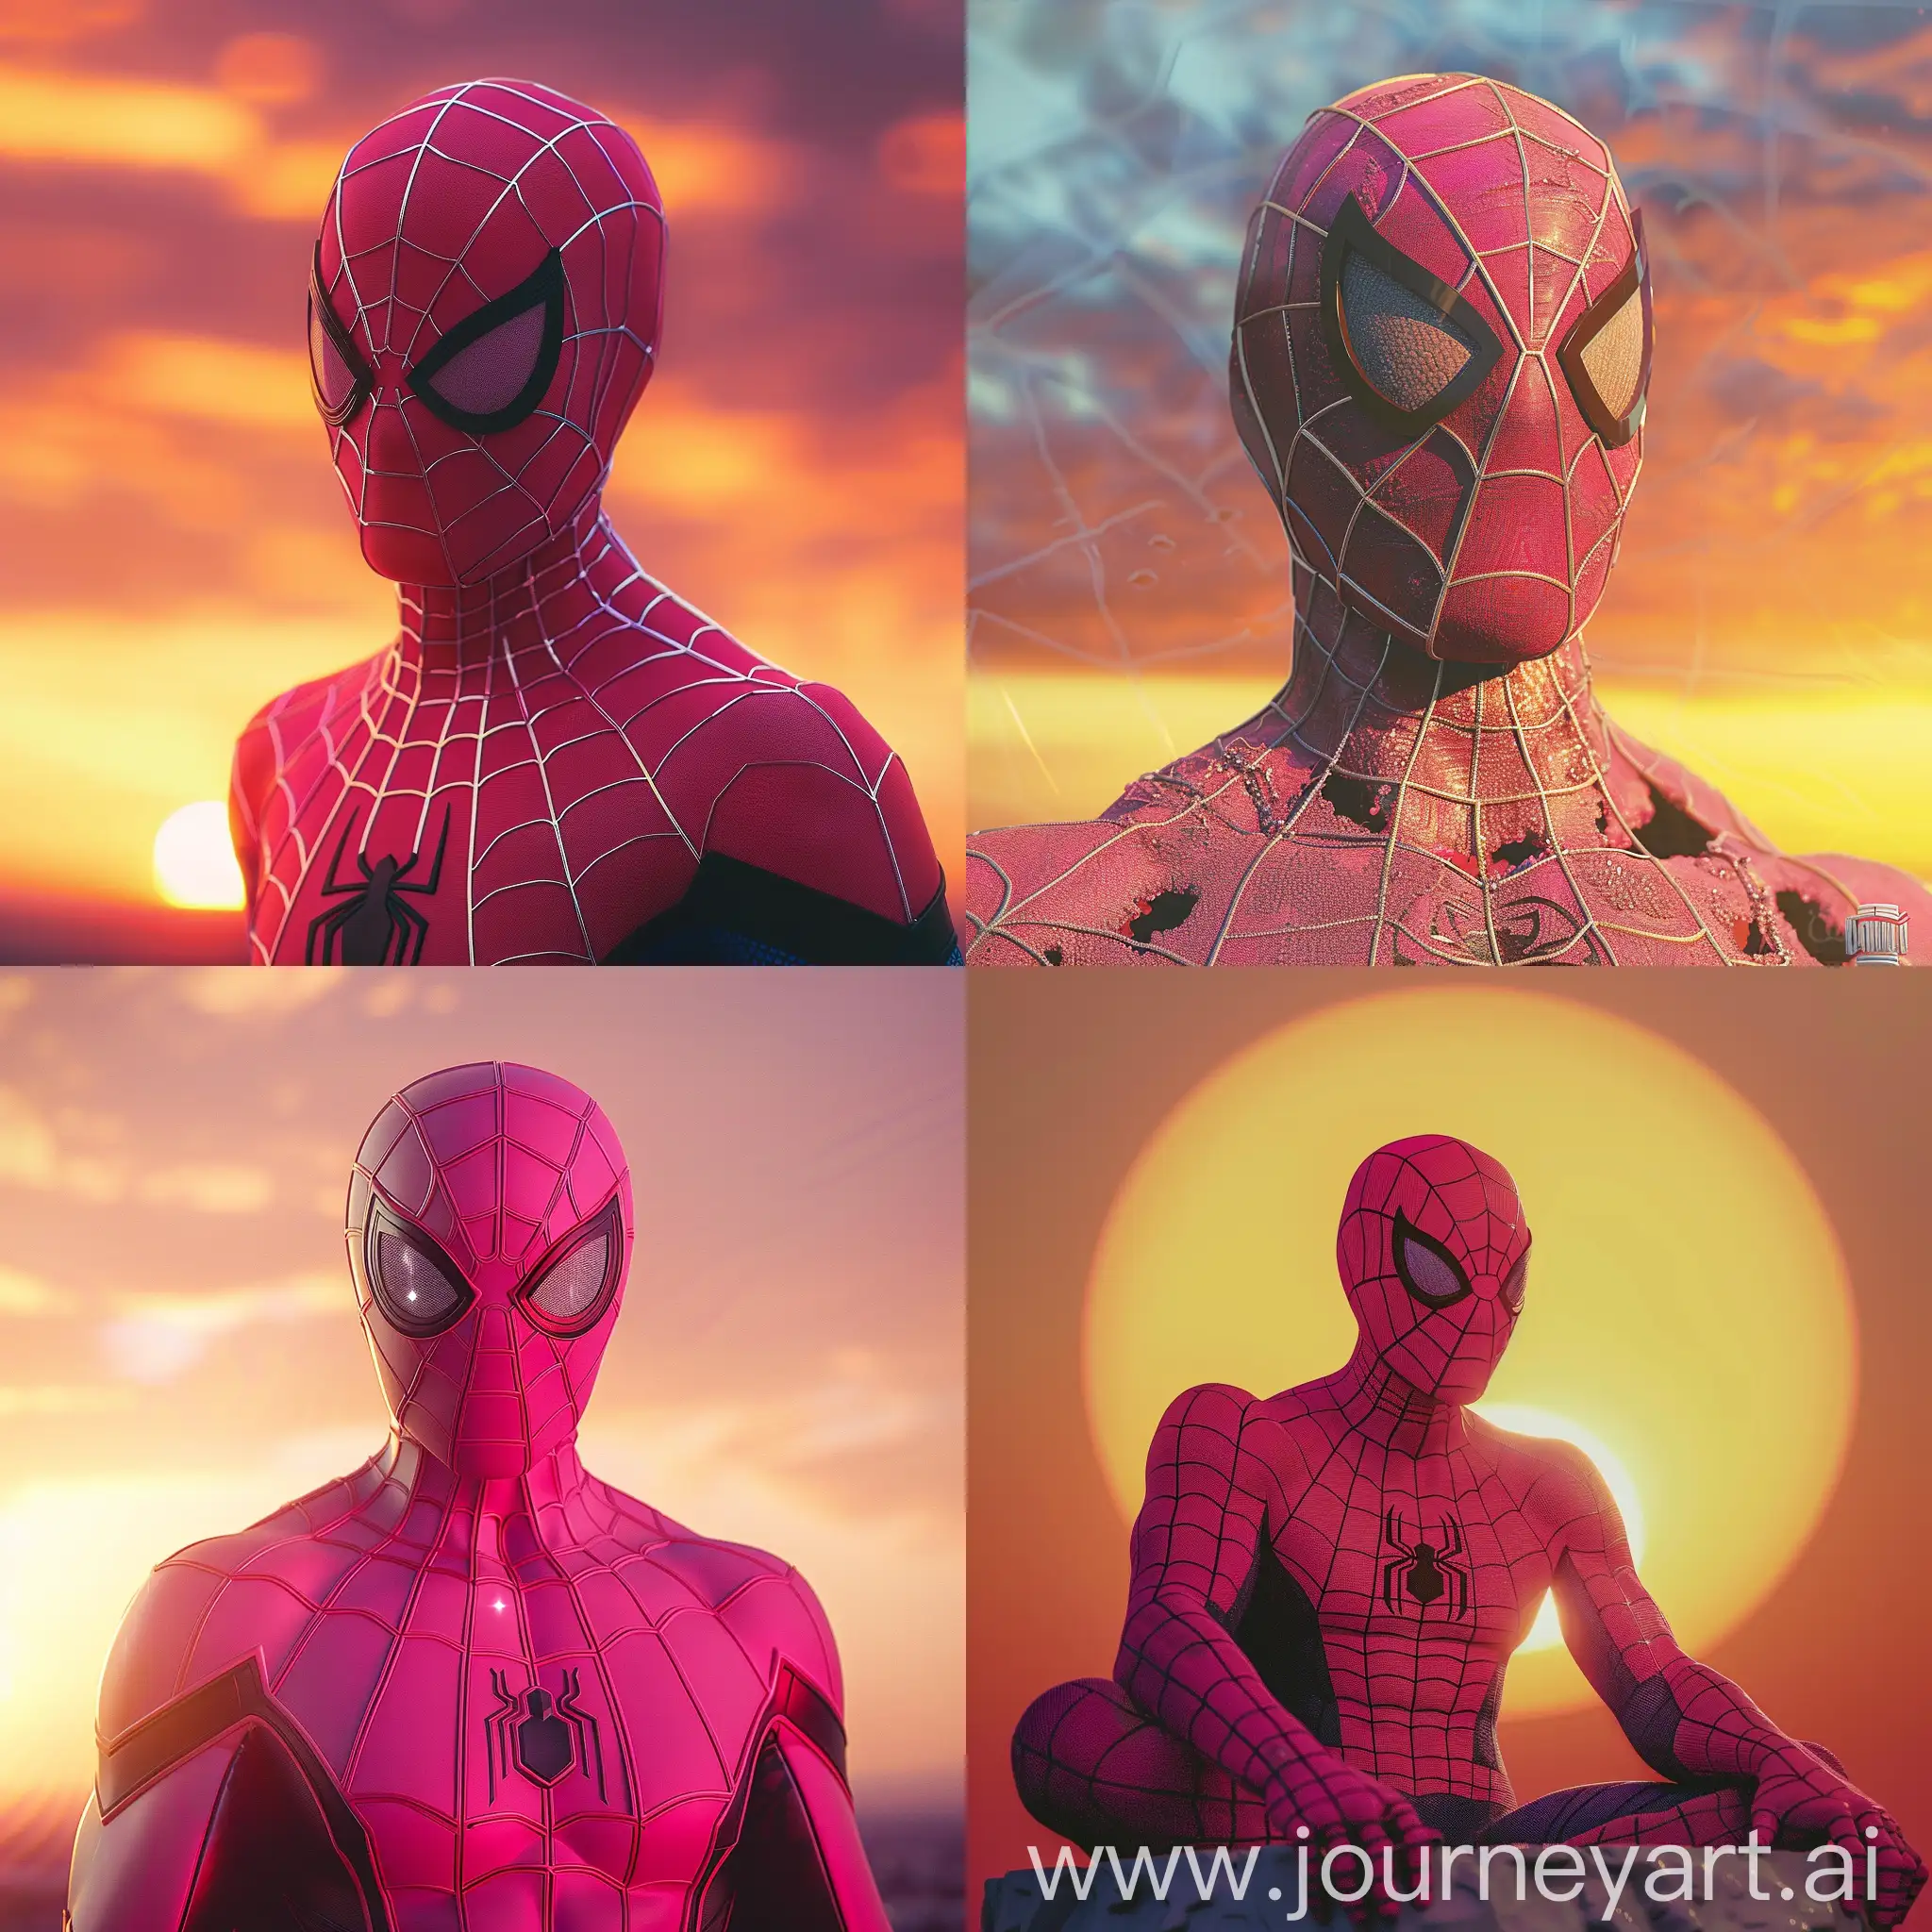 pink spiderman against a sunset background